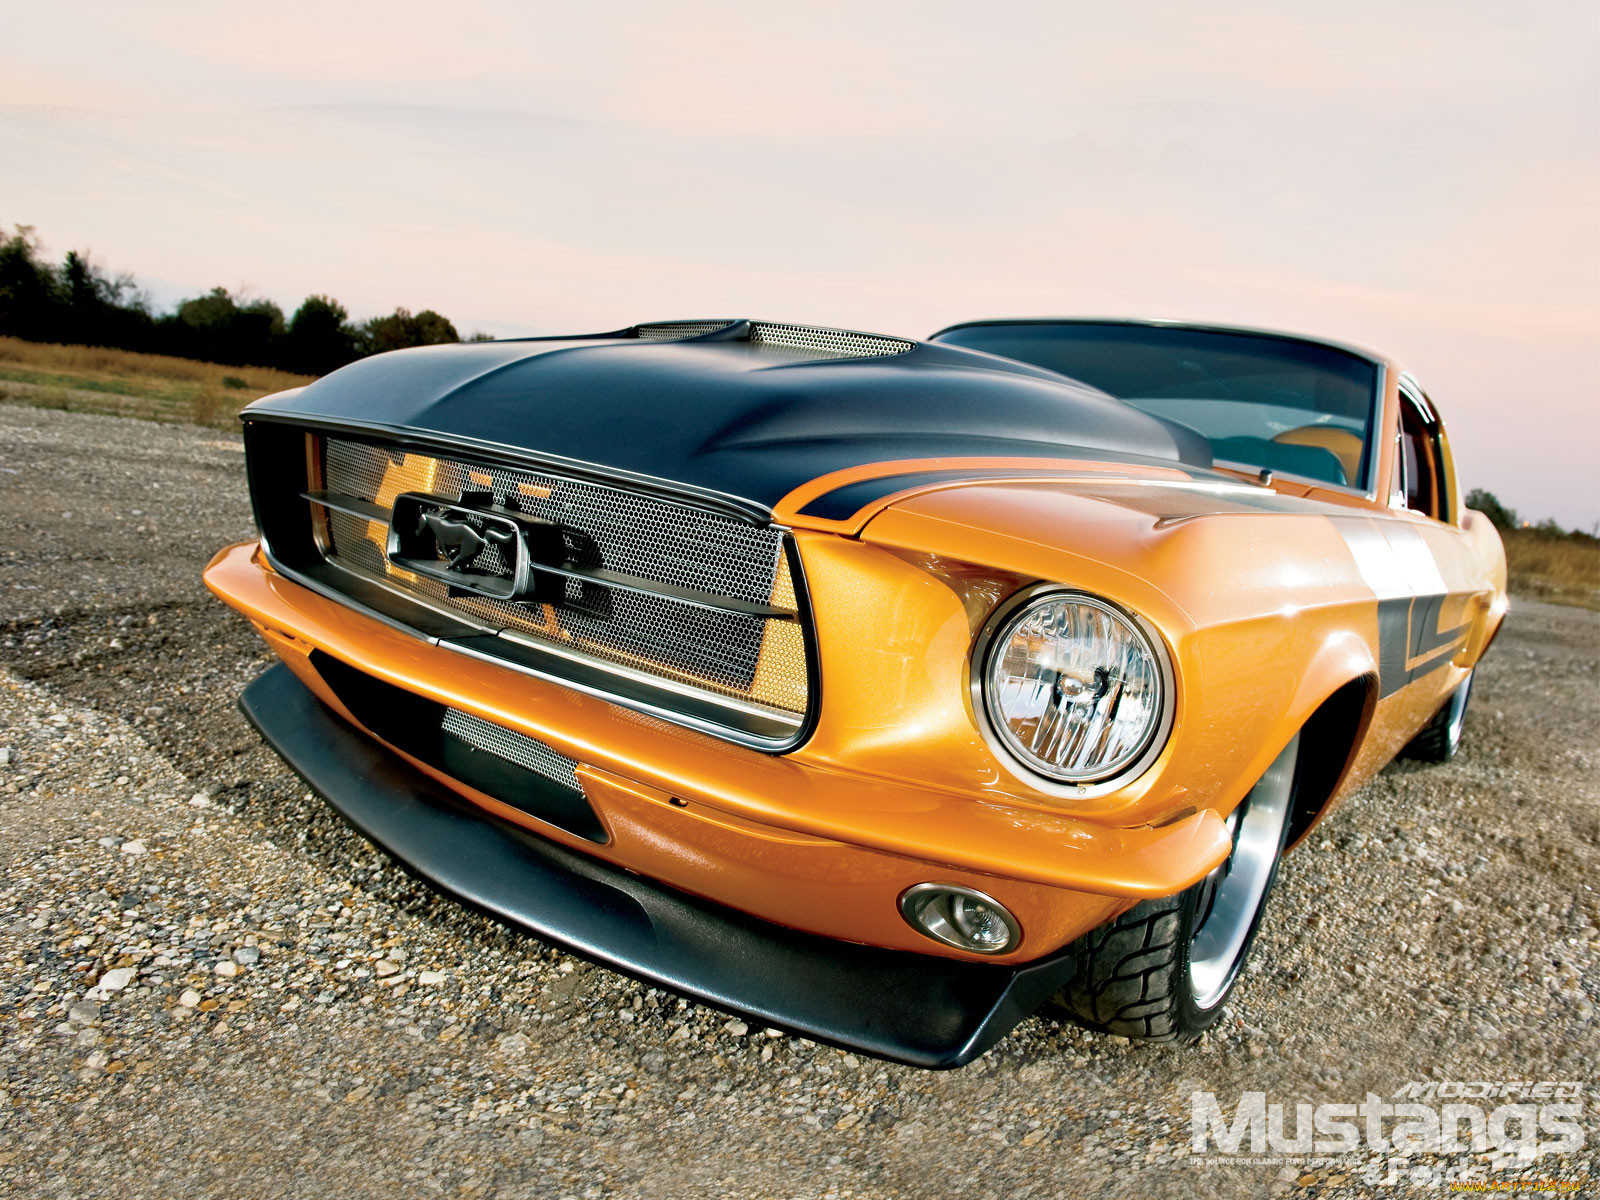 1967, ford, mustang, fastback, 